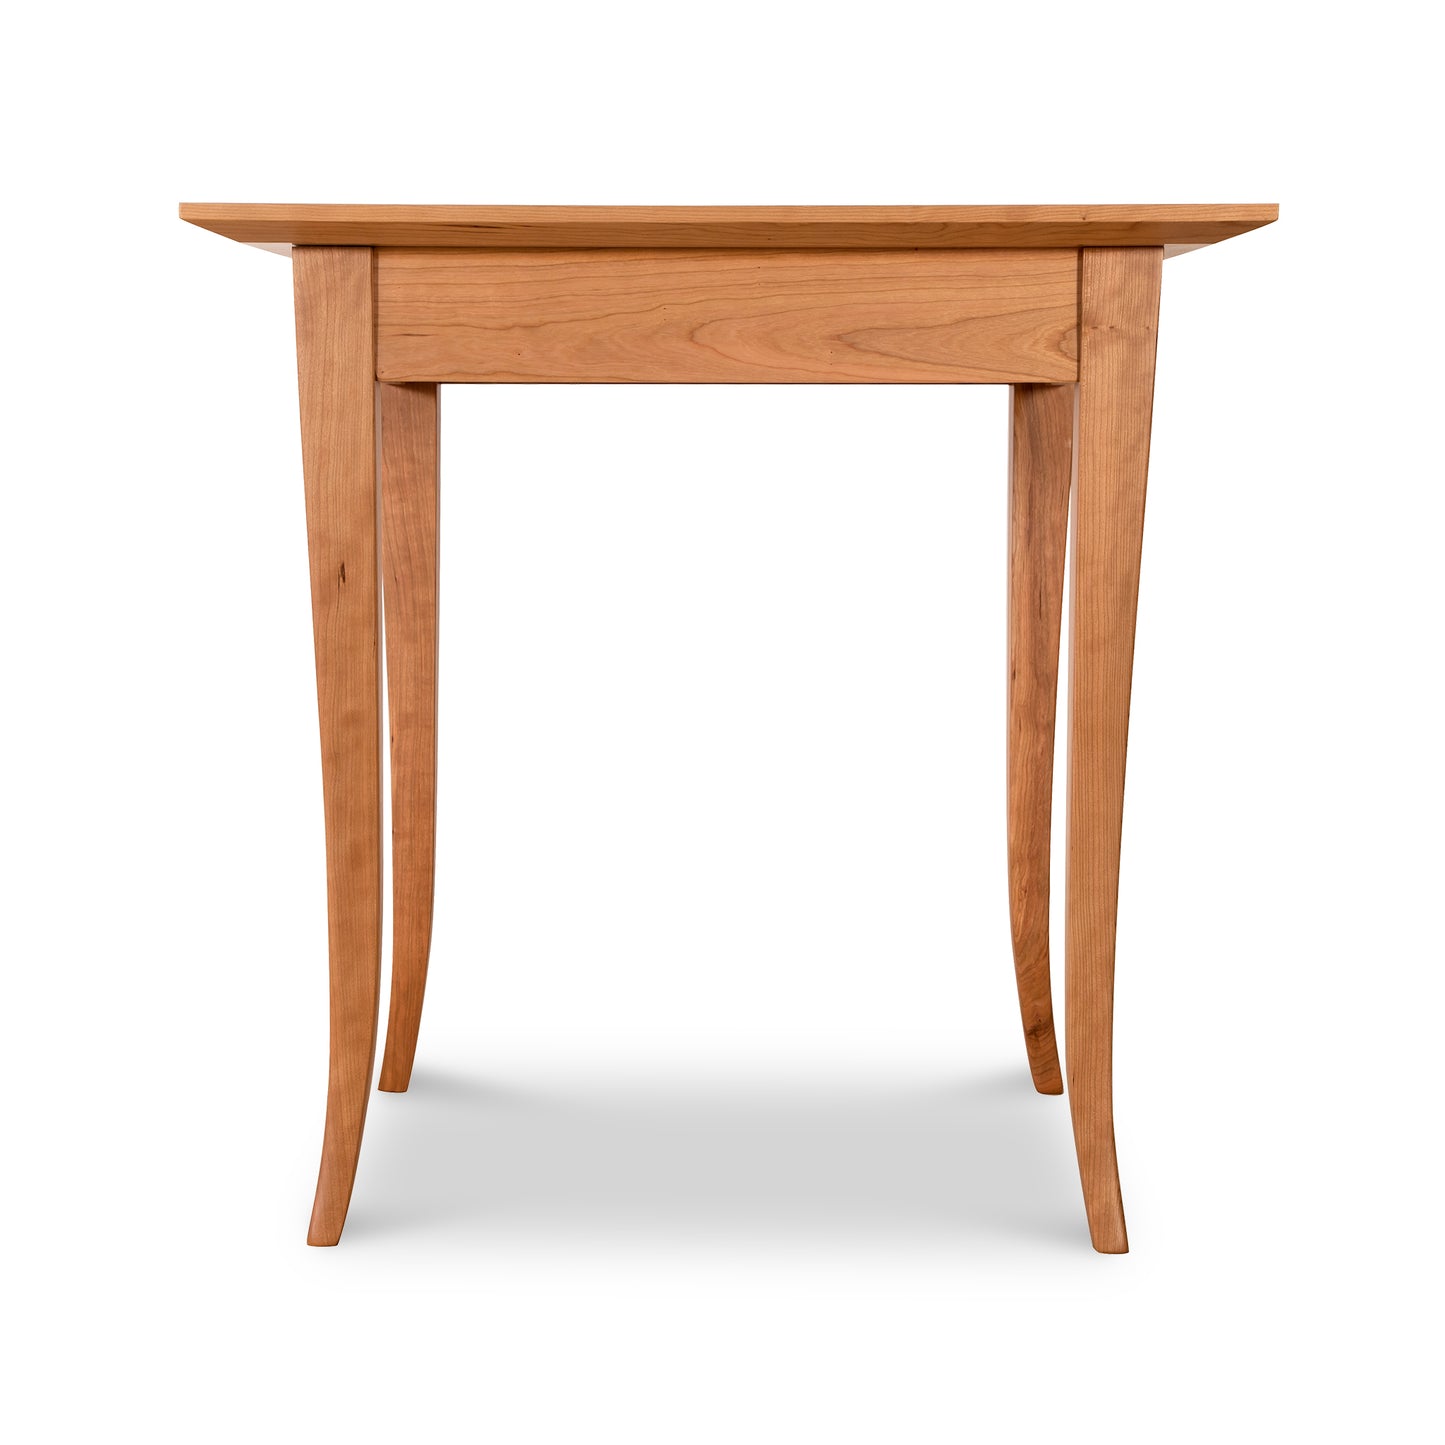 A Classic Shaker Flare Leg Square Solid Top Table crafted from hardwoods, made by Lyndon Furniture.